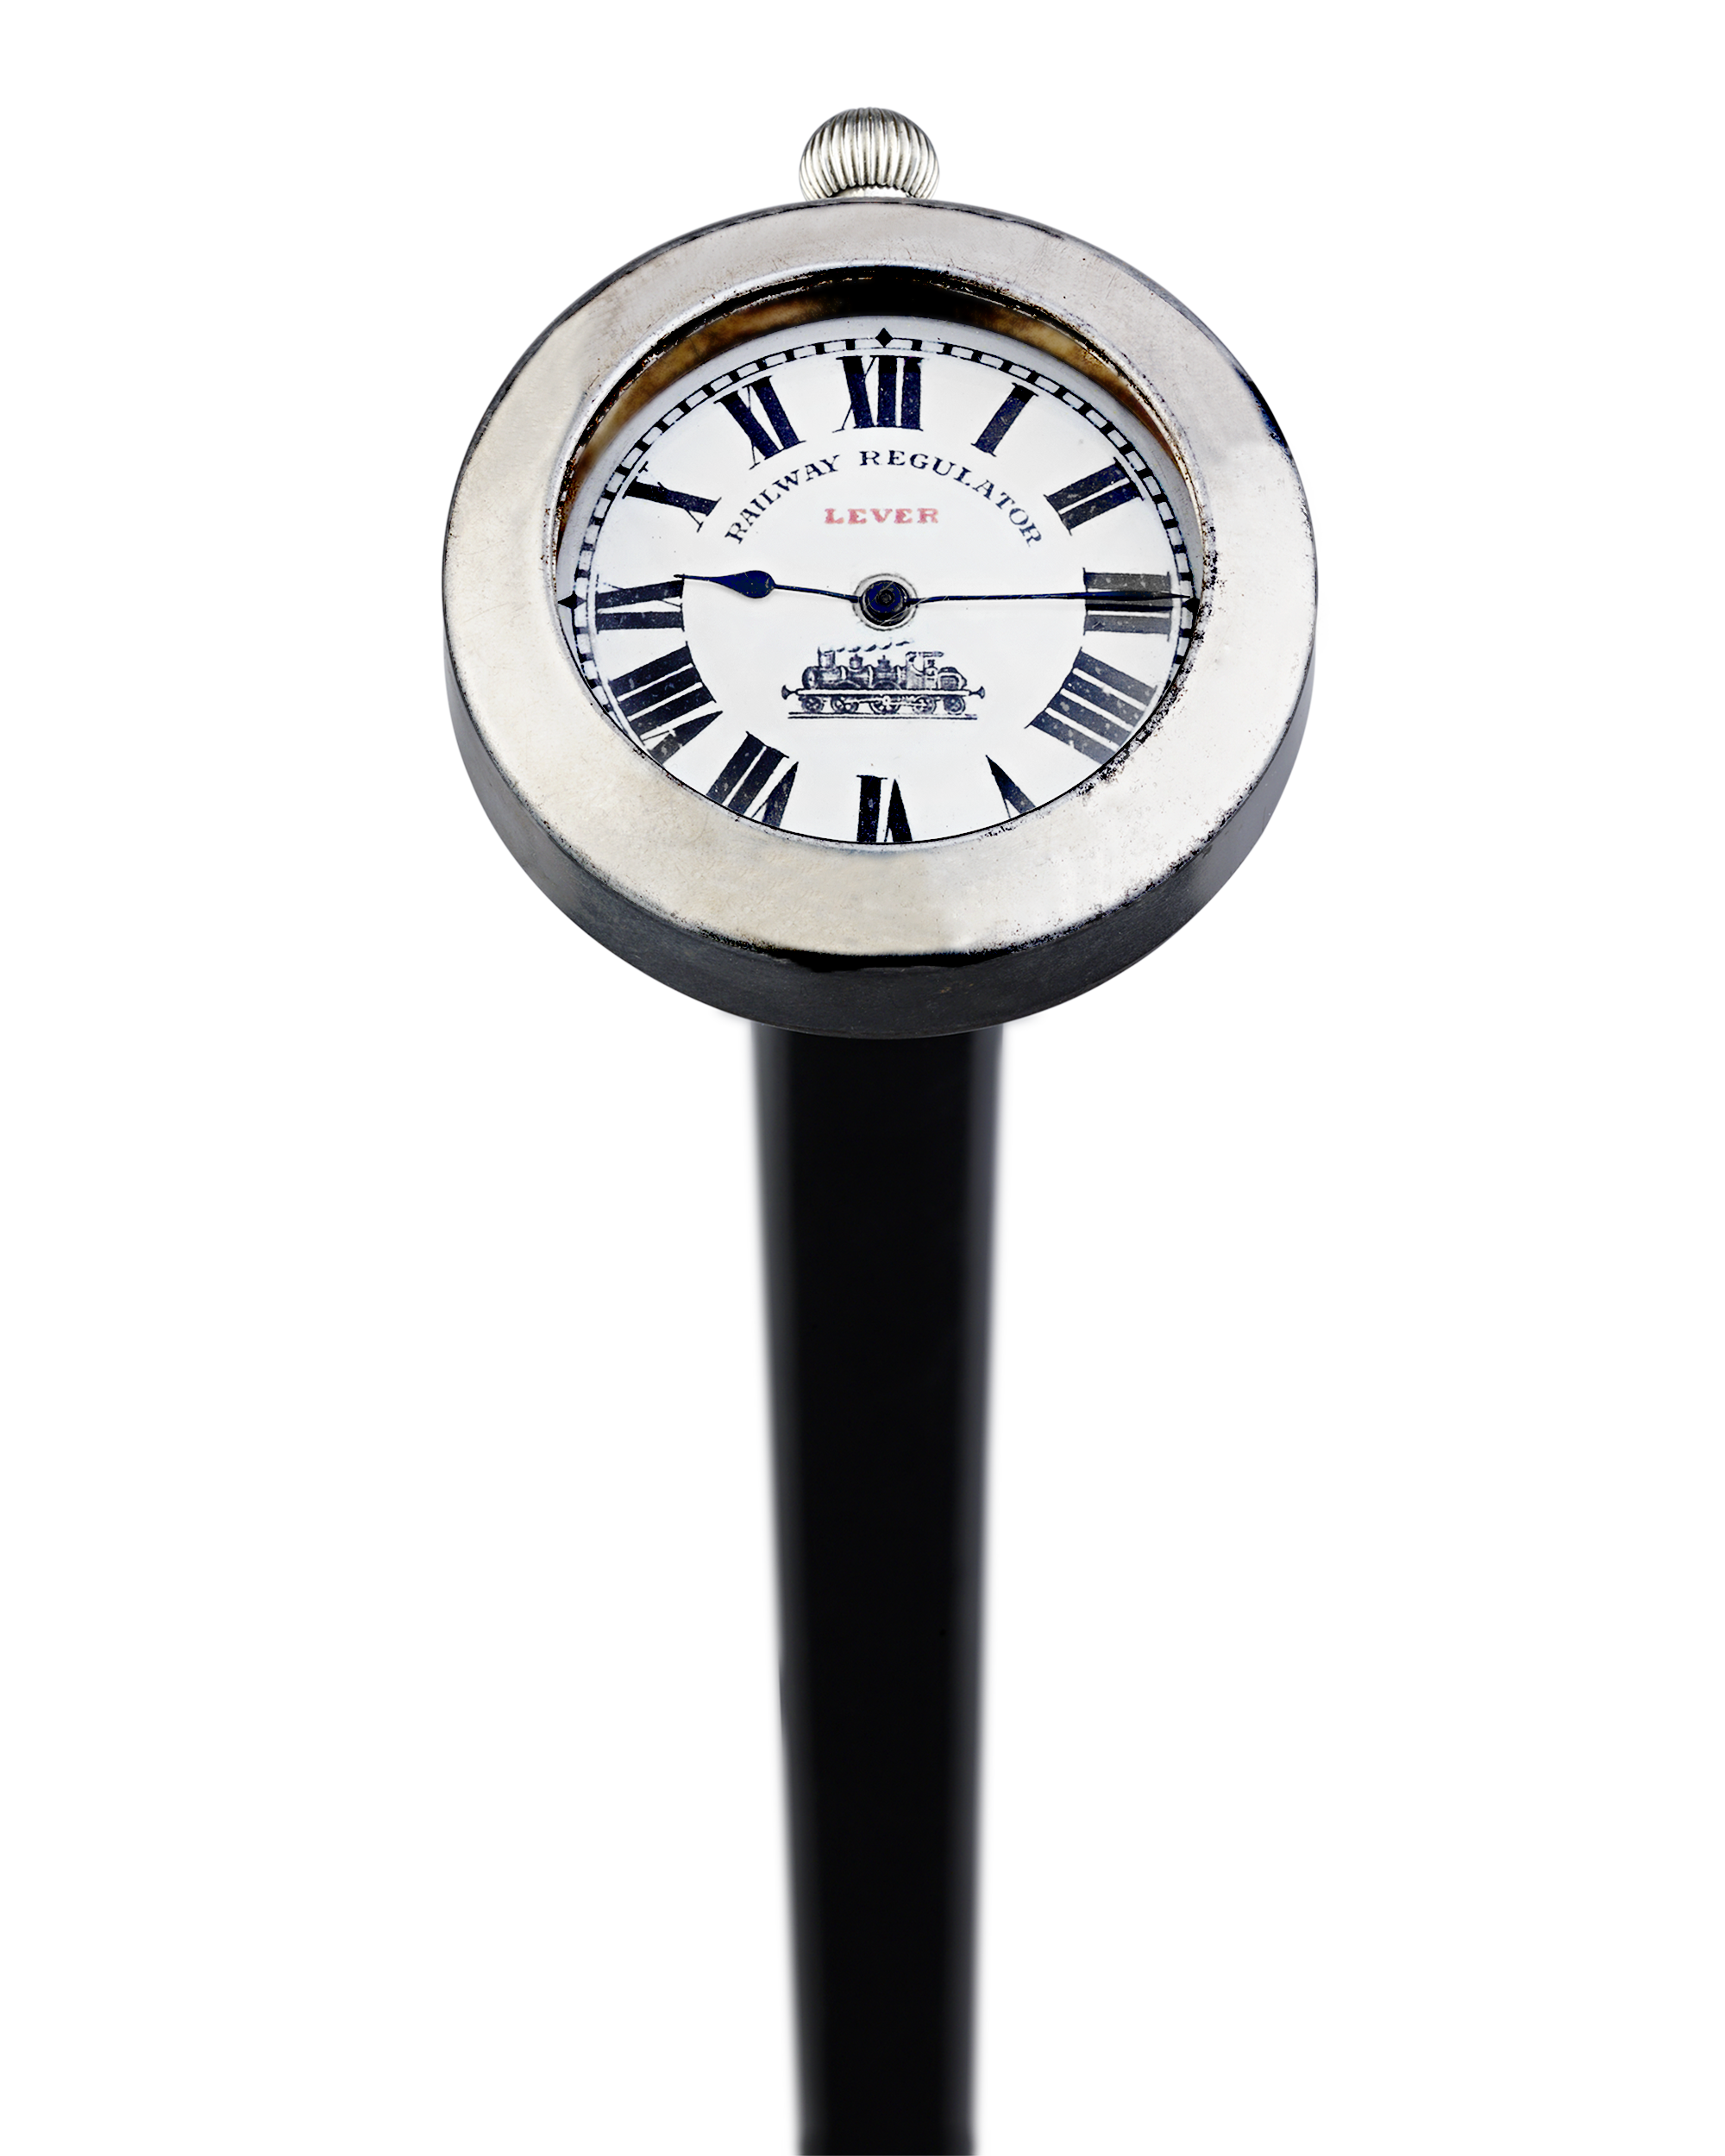 Stationmaster's Watch Cane